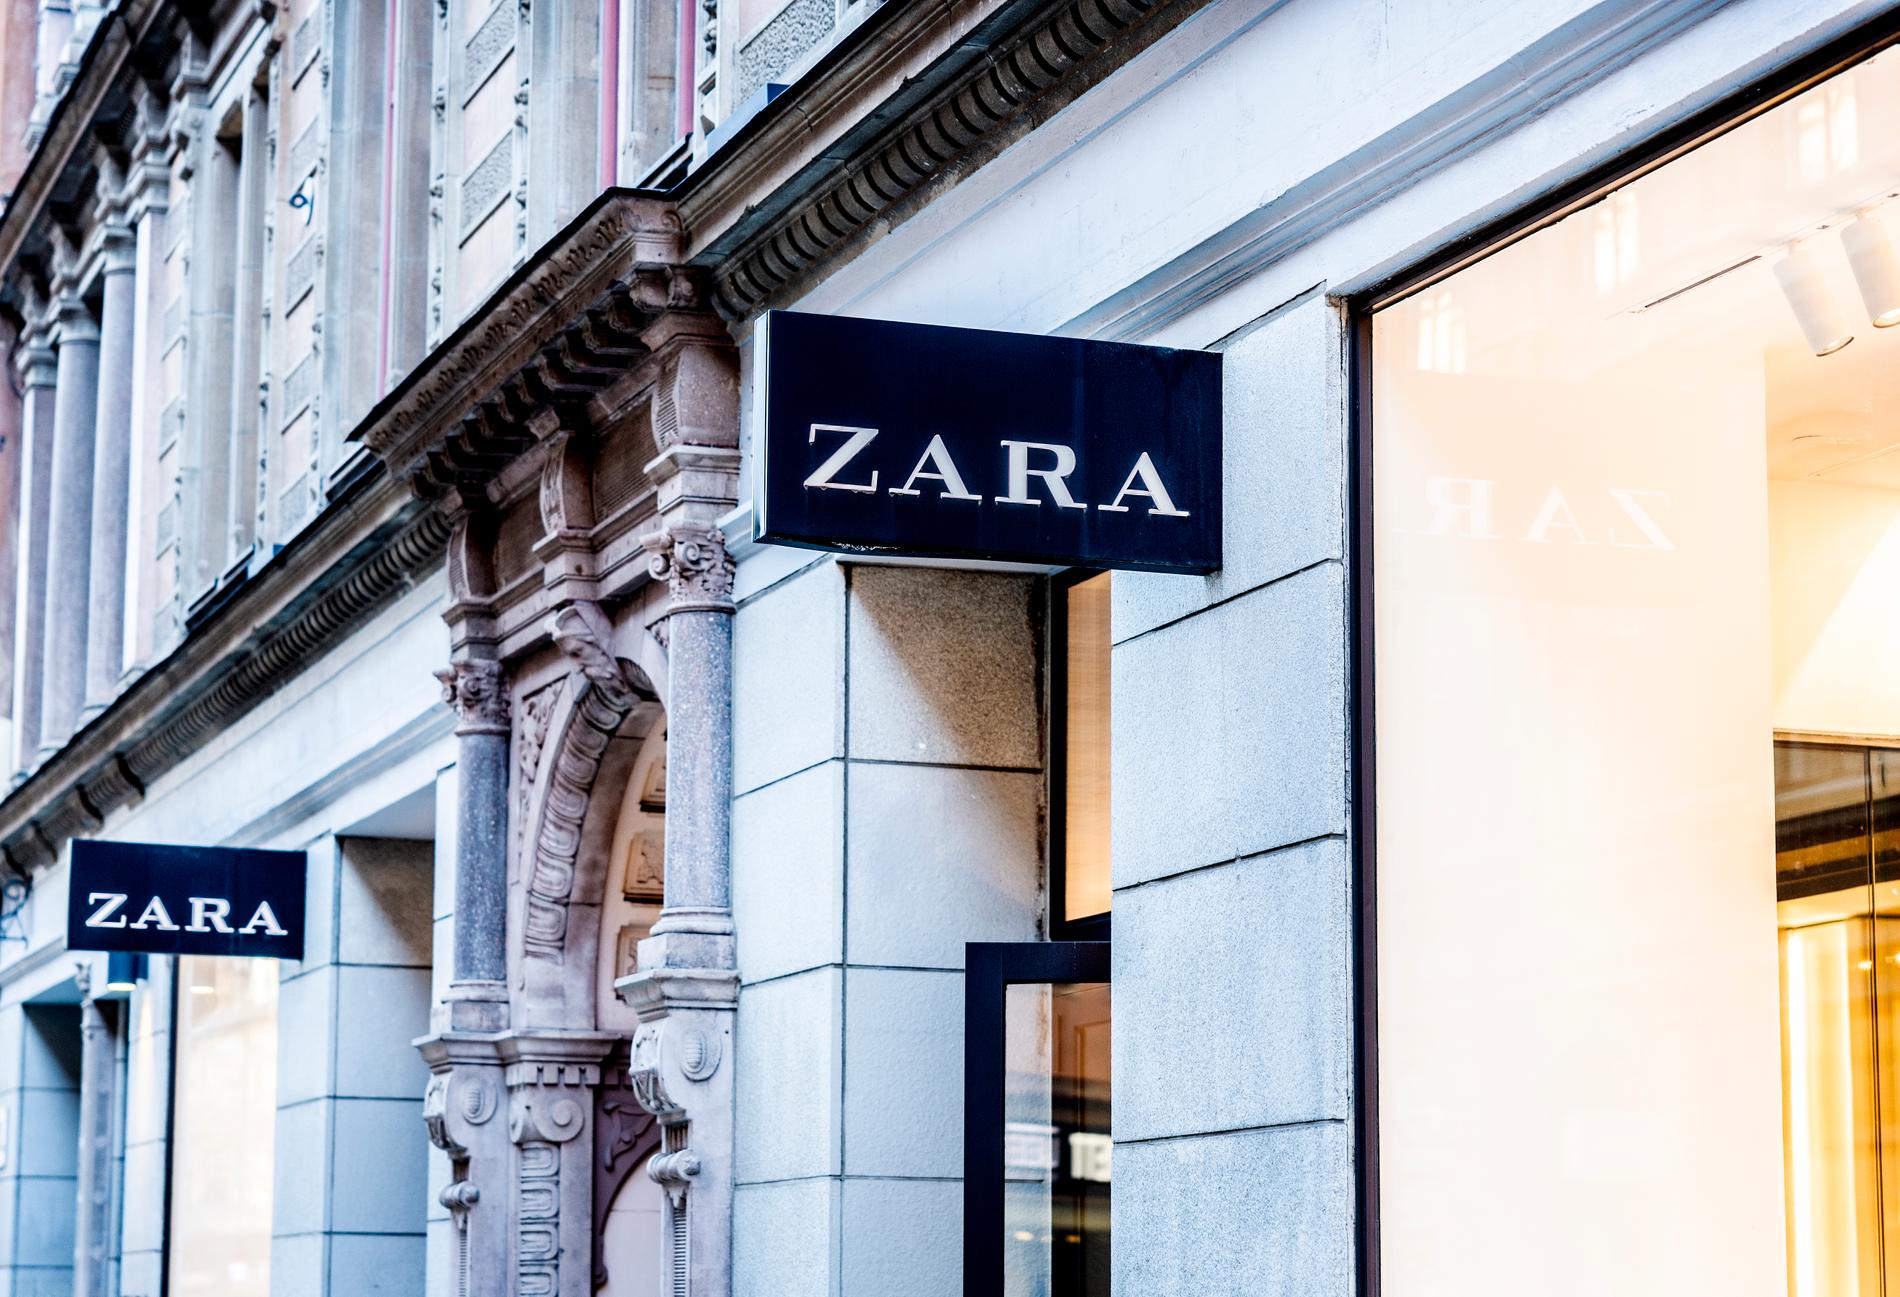 "Zara is probably the worst employer I've had," says a former employee.